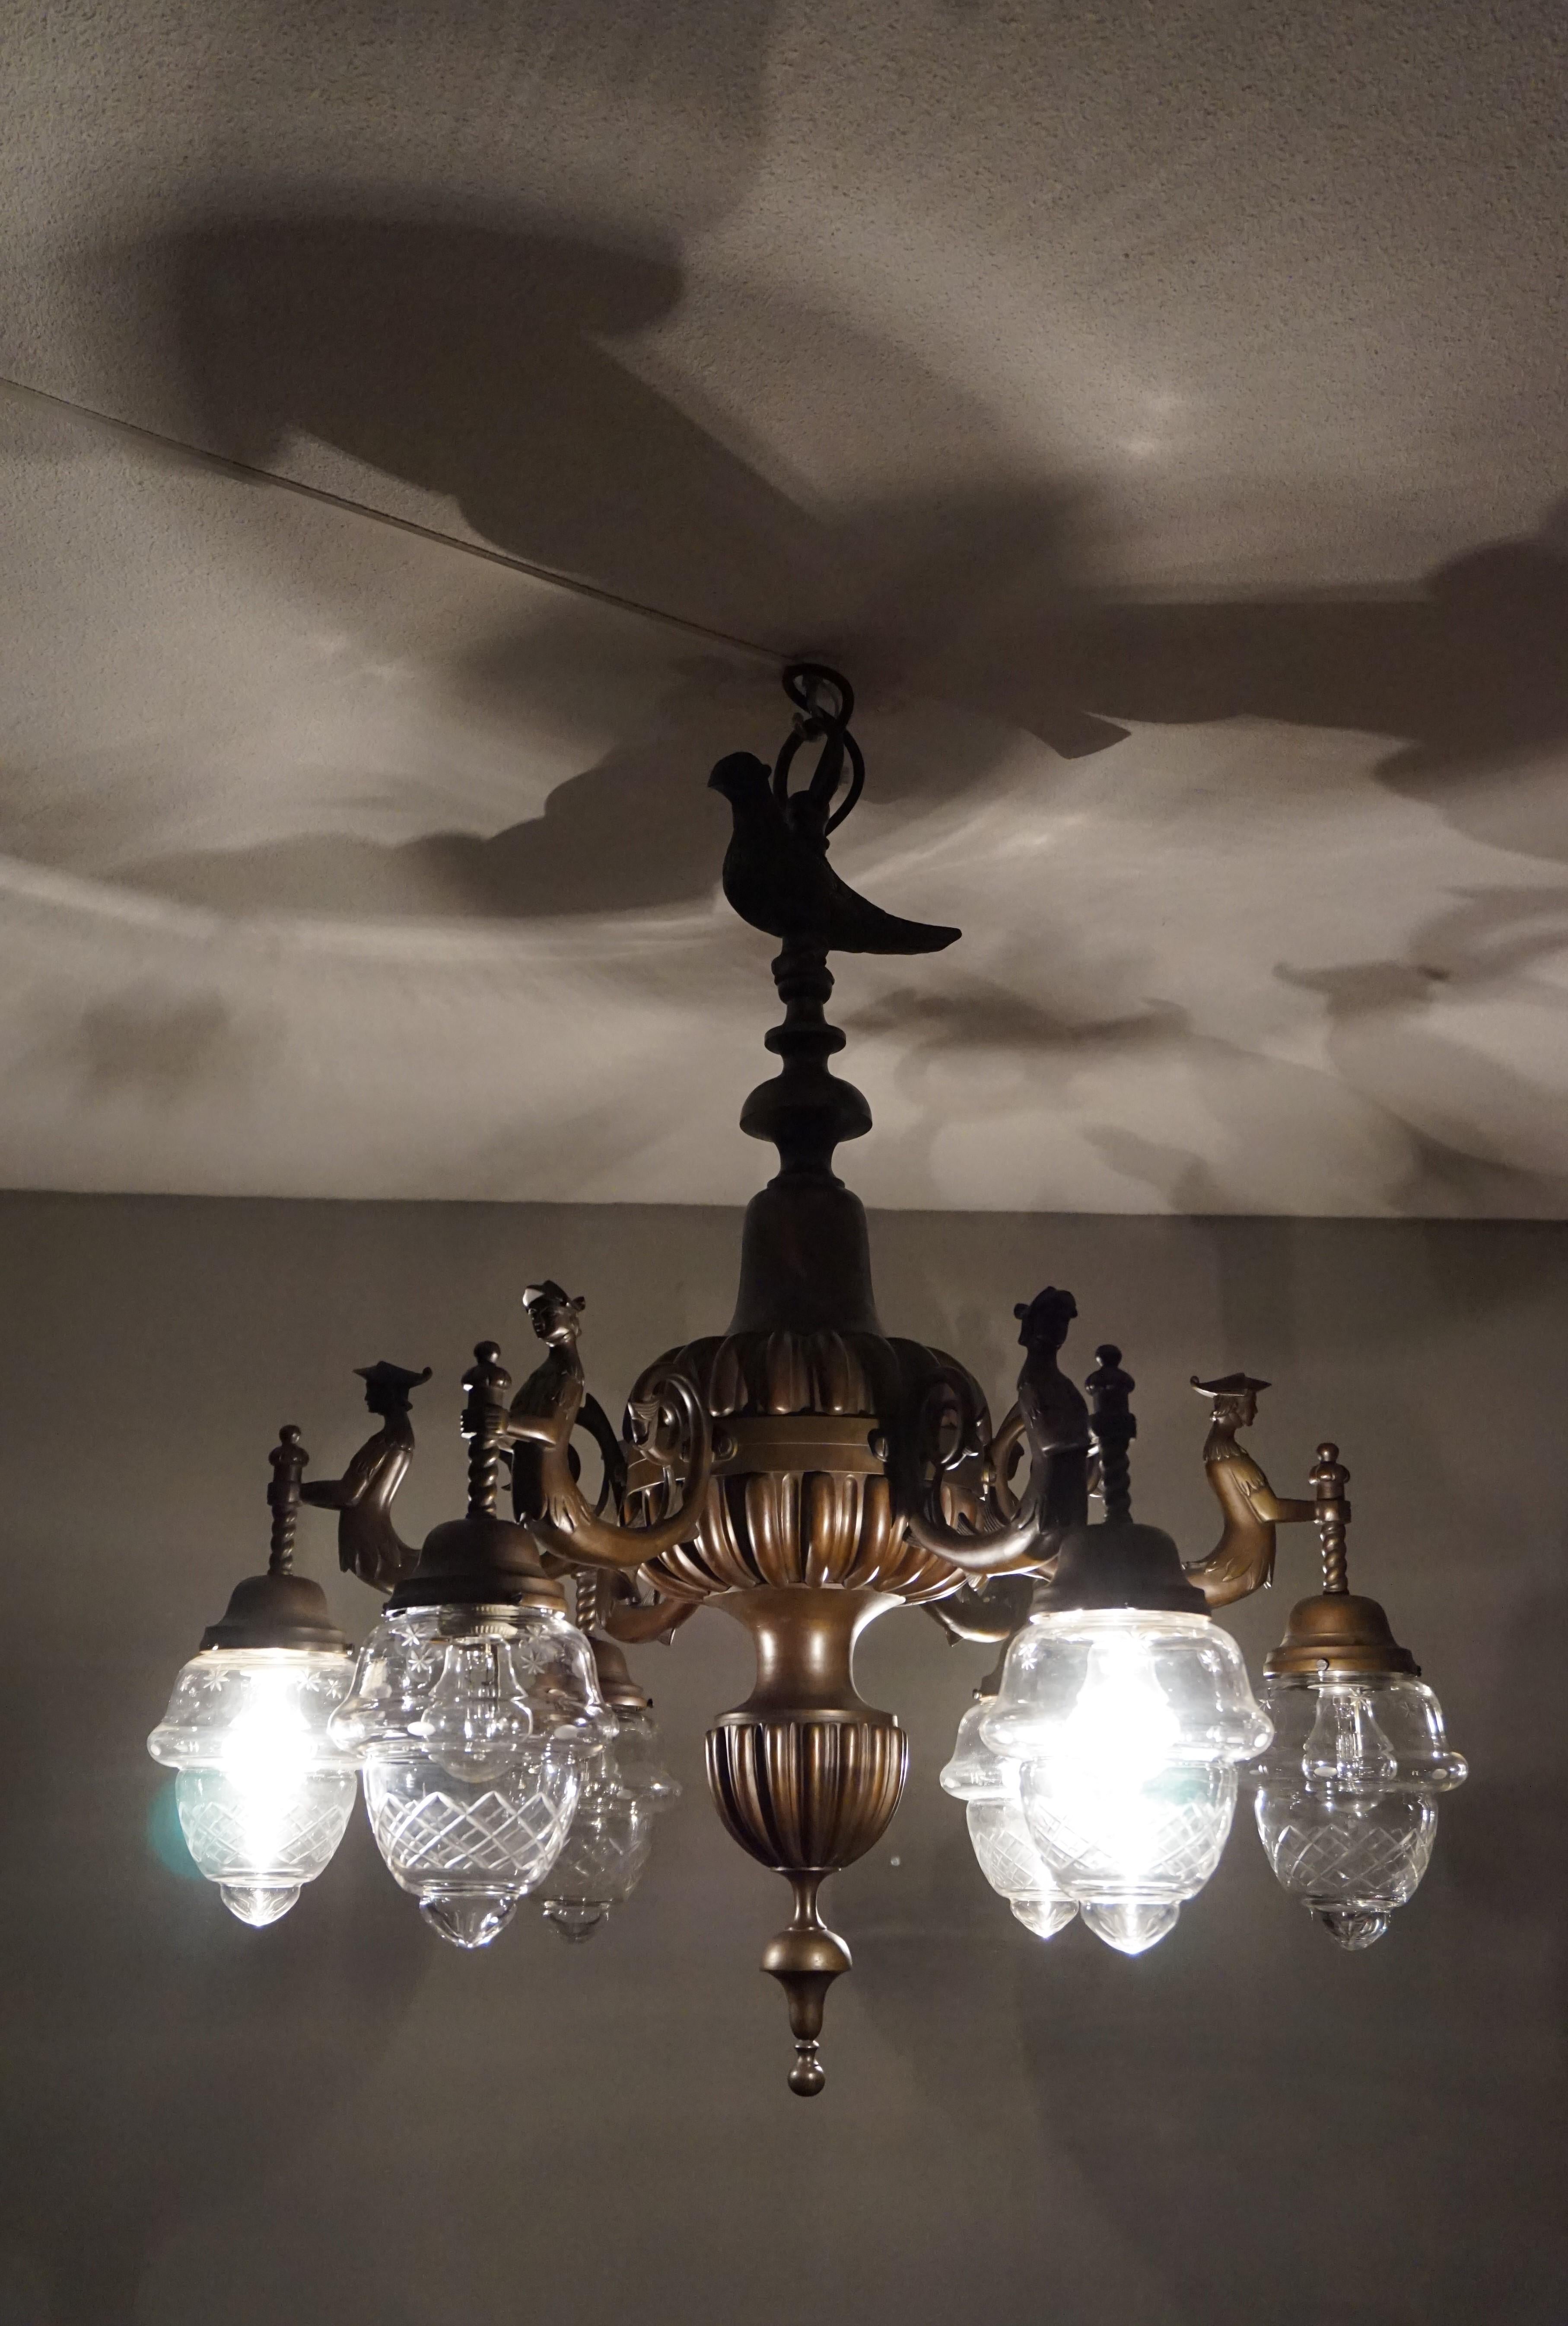 European Large Six-Light Bronze Chandelier with Folkore or Fable Hybrid Guard Sculptures For Sale